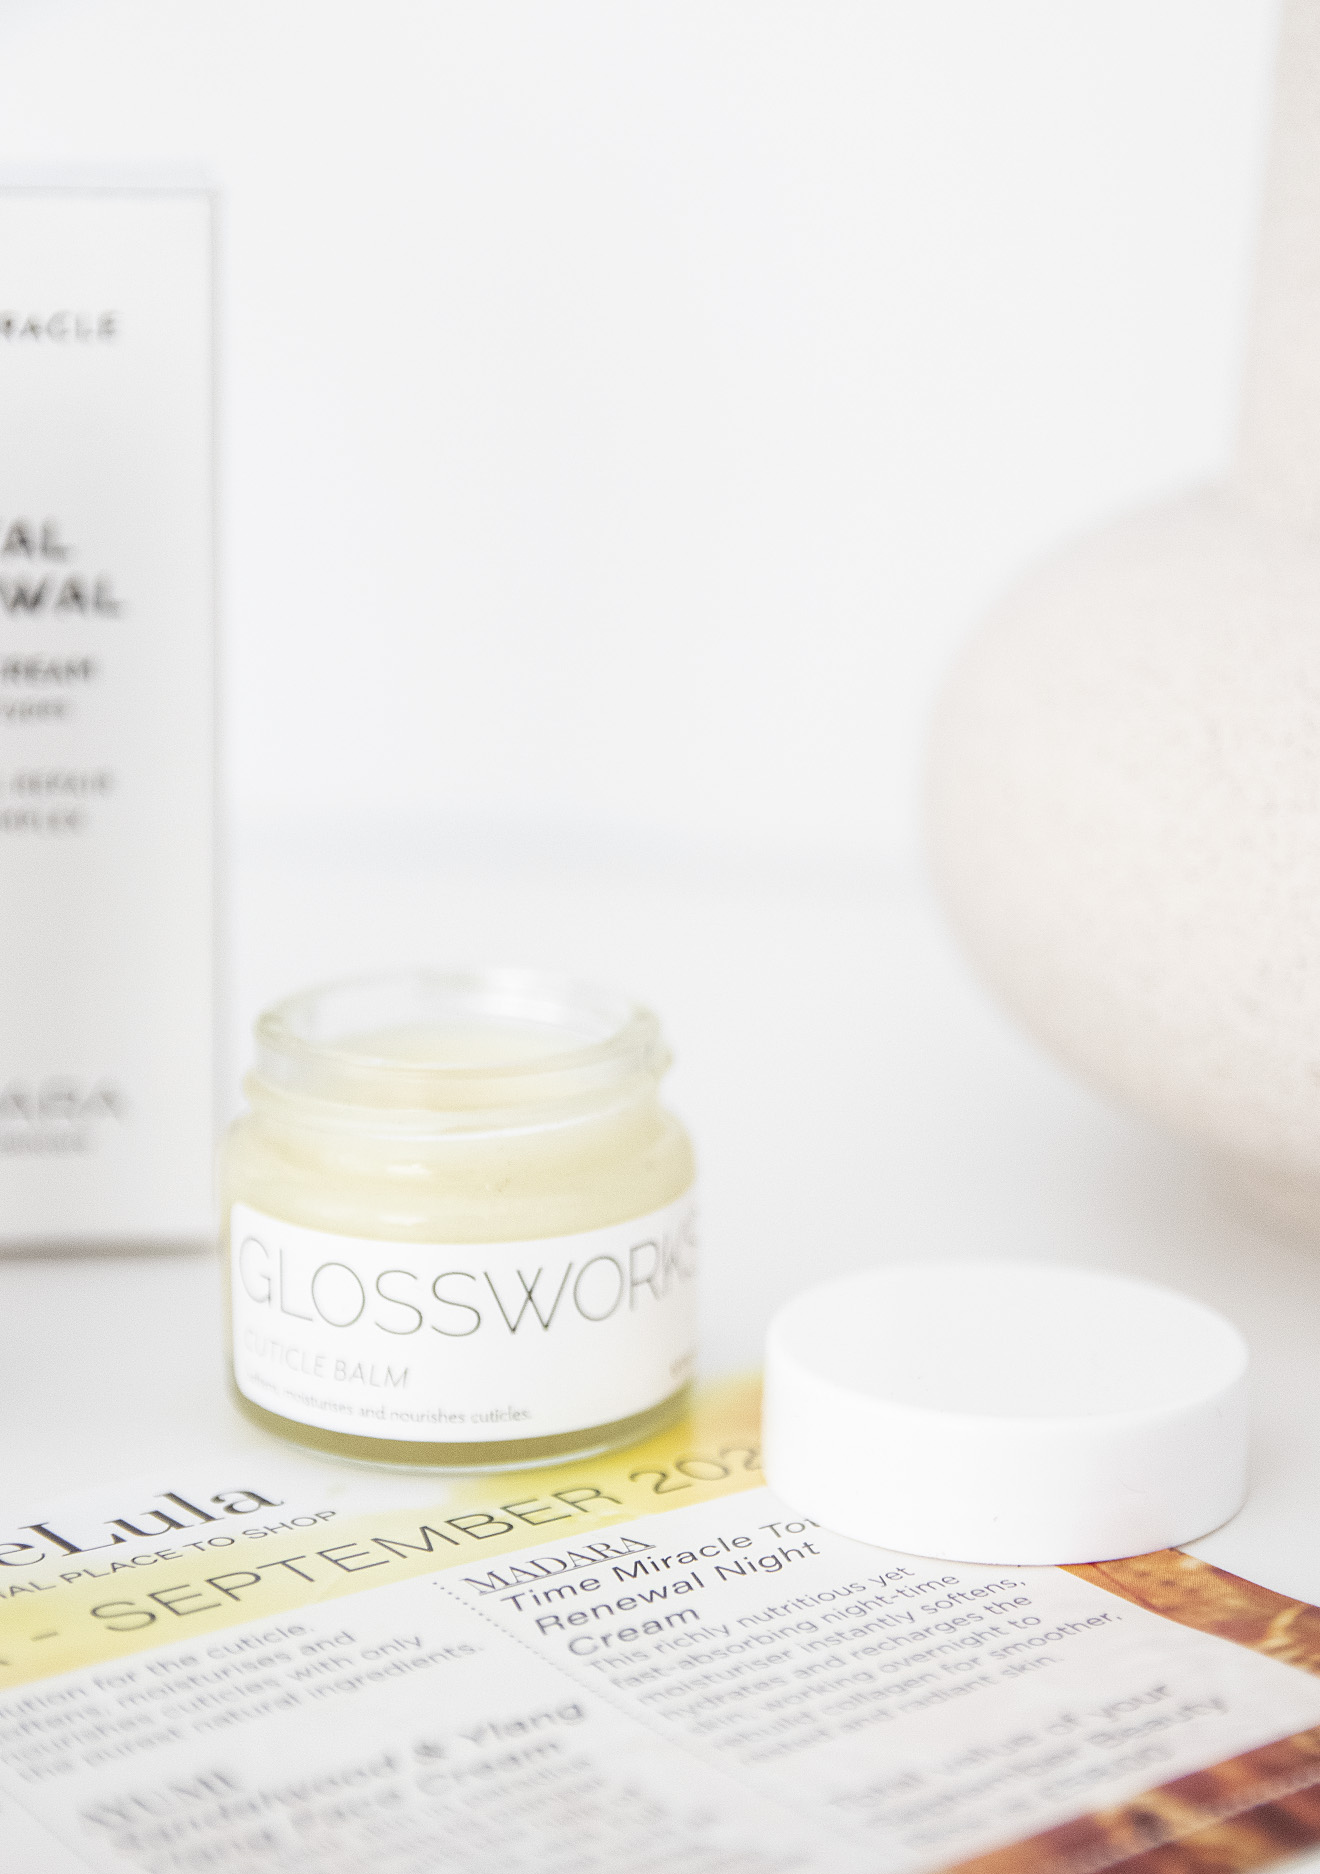 Glossworks Natural Cuticle Balm